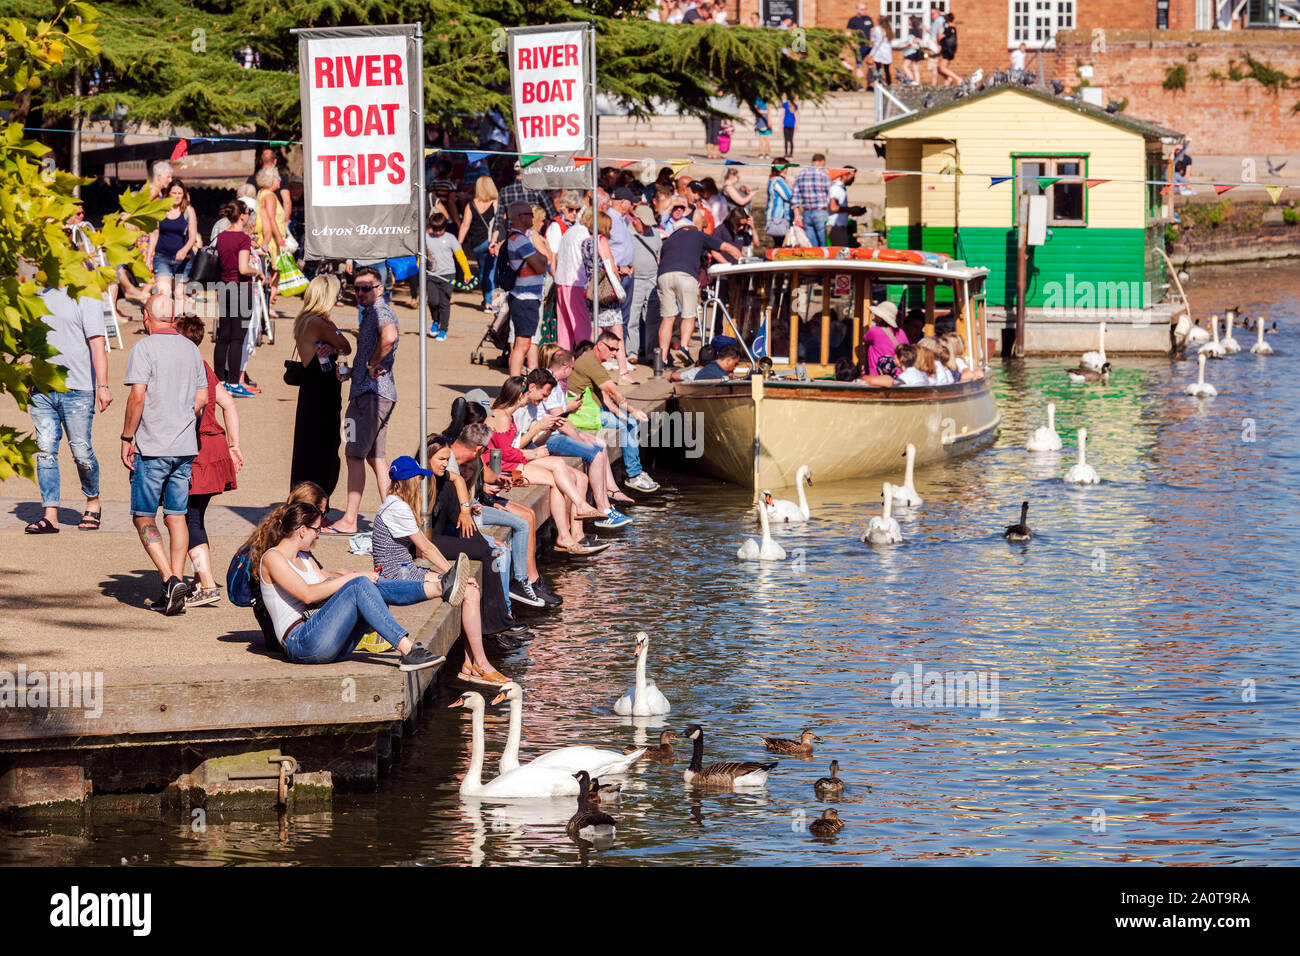 Stratford upon Avon, England, UK. People on the river bank watching swans and tourists taking boat trips on a summer day. Stock Photo